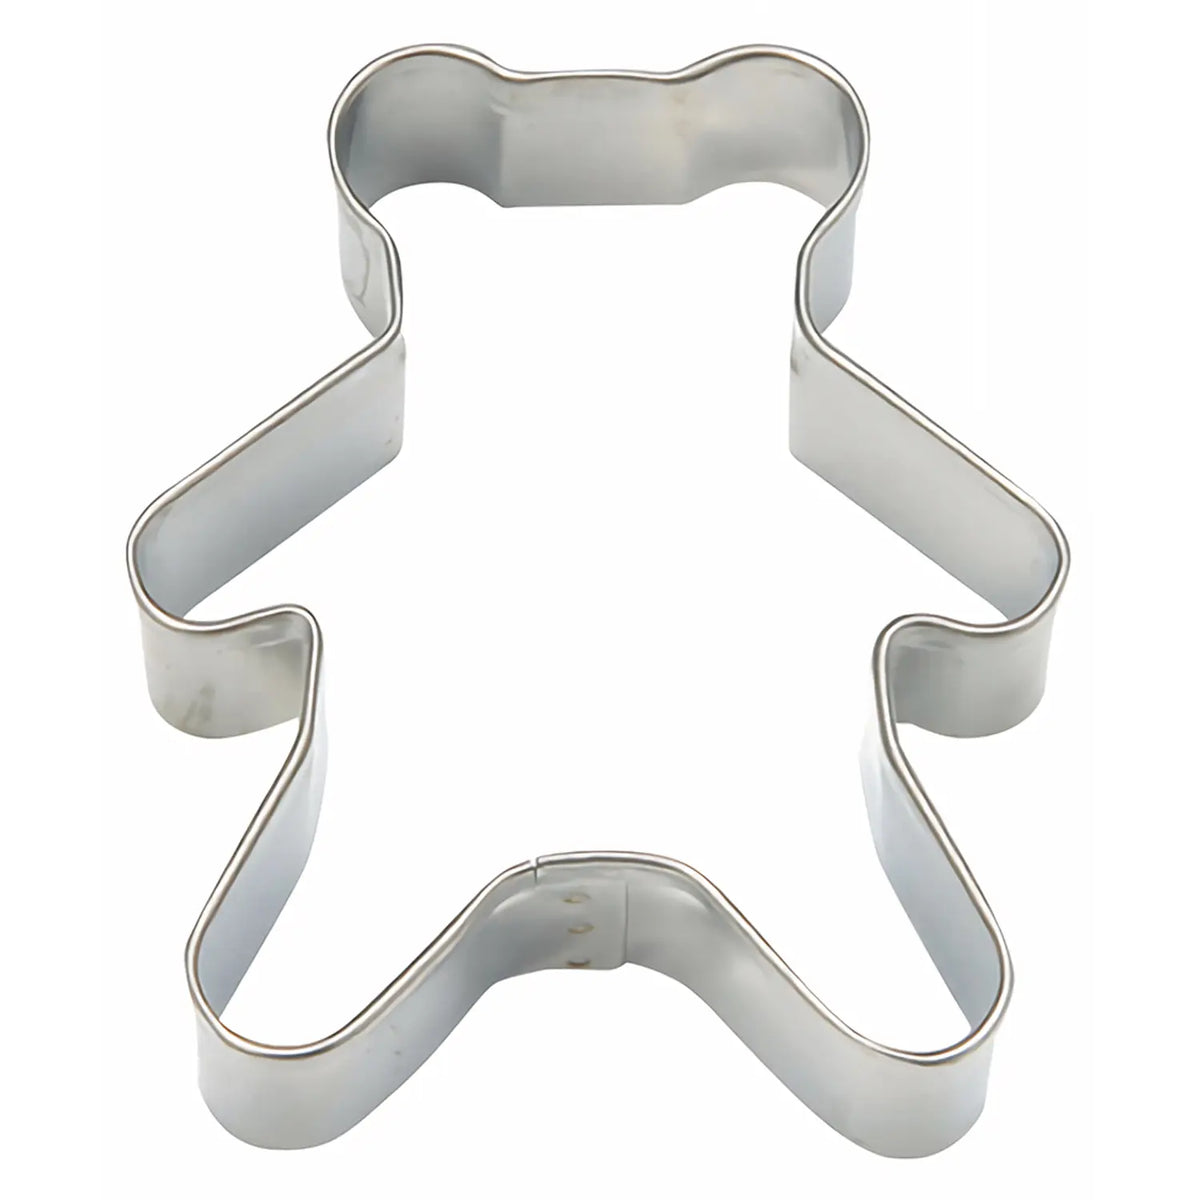 TIGERCROWN Cake Land Stainless Steel Cookie Cutter Standing Bear